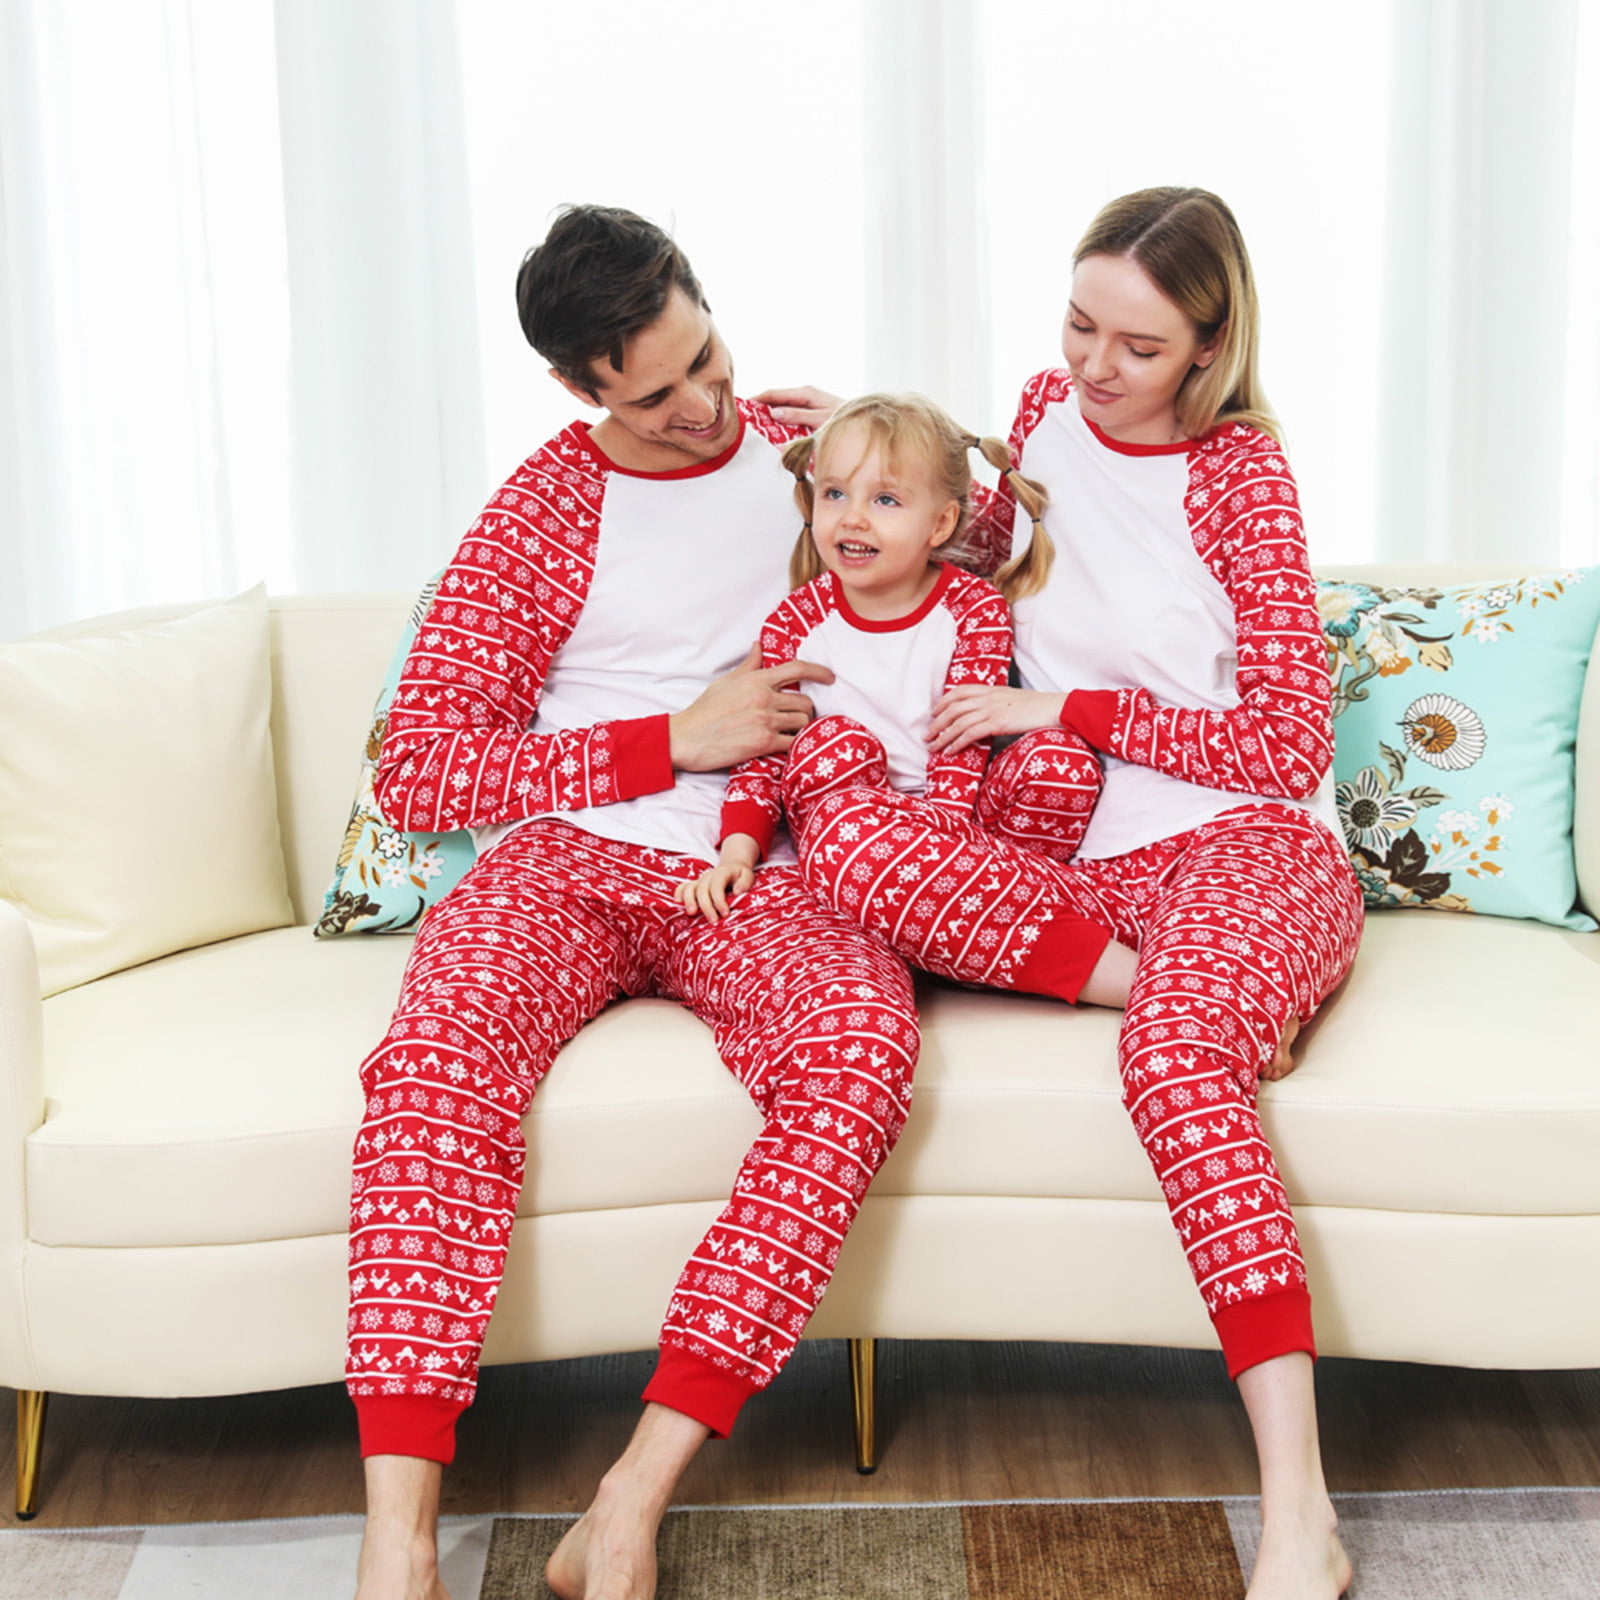 Christmas Pjs Family Matching Sleepwear Knit Holiday Mix Match Pajamas PJs Collection Tops and Long Pants Sleepwear Outfits 